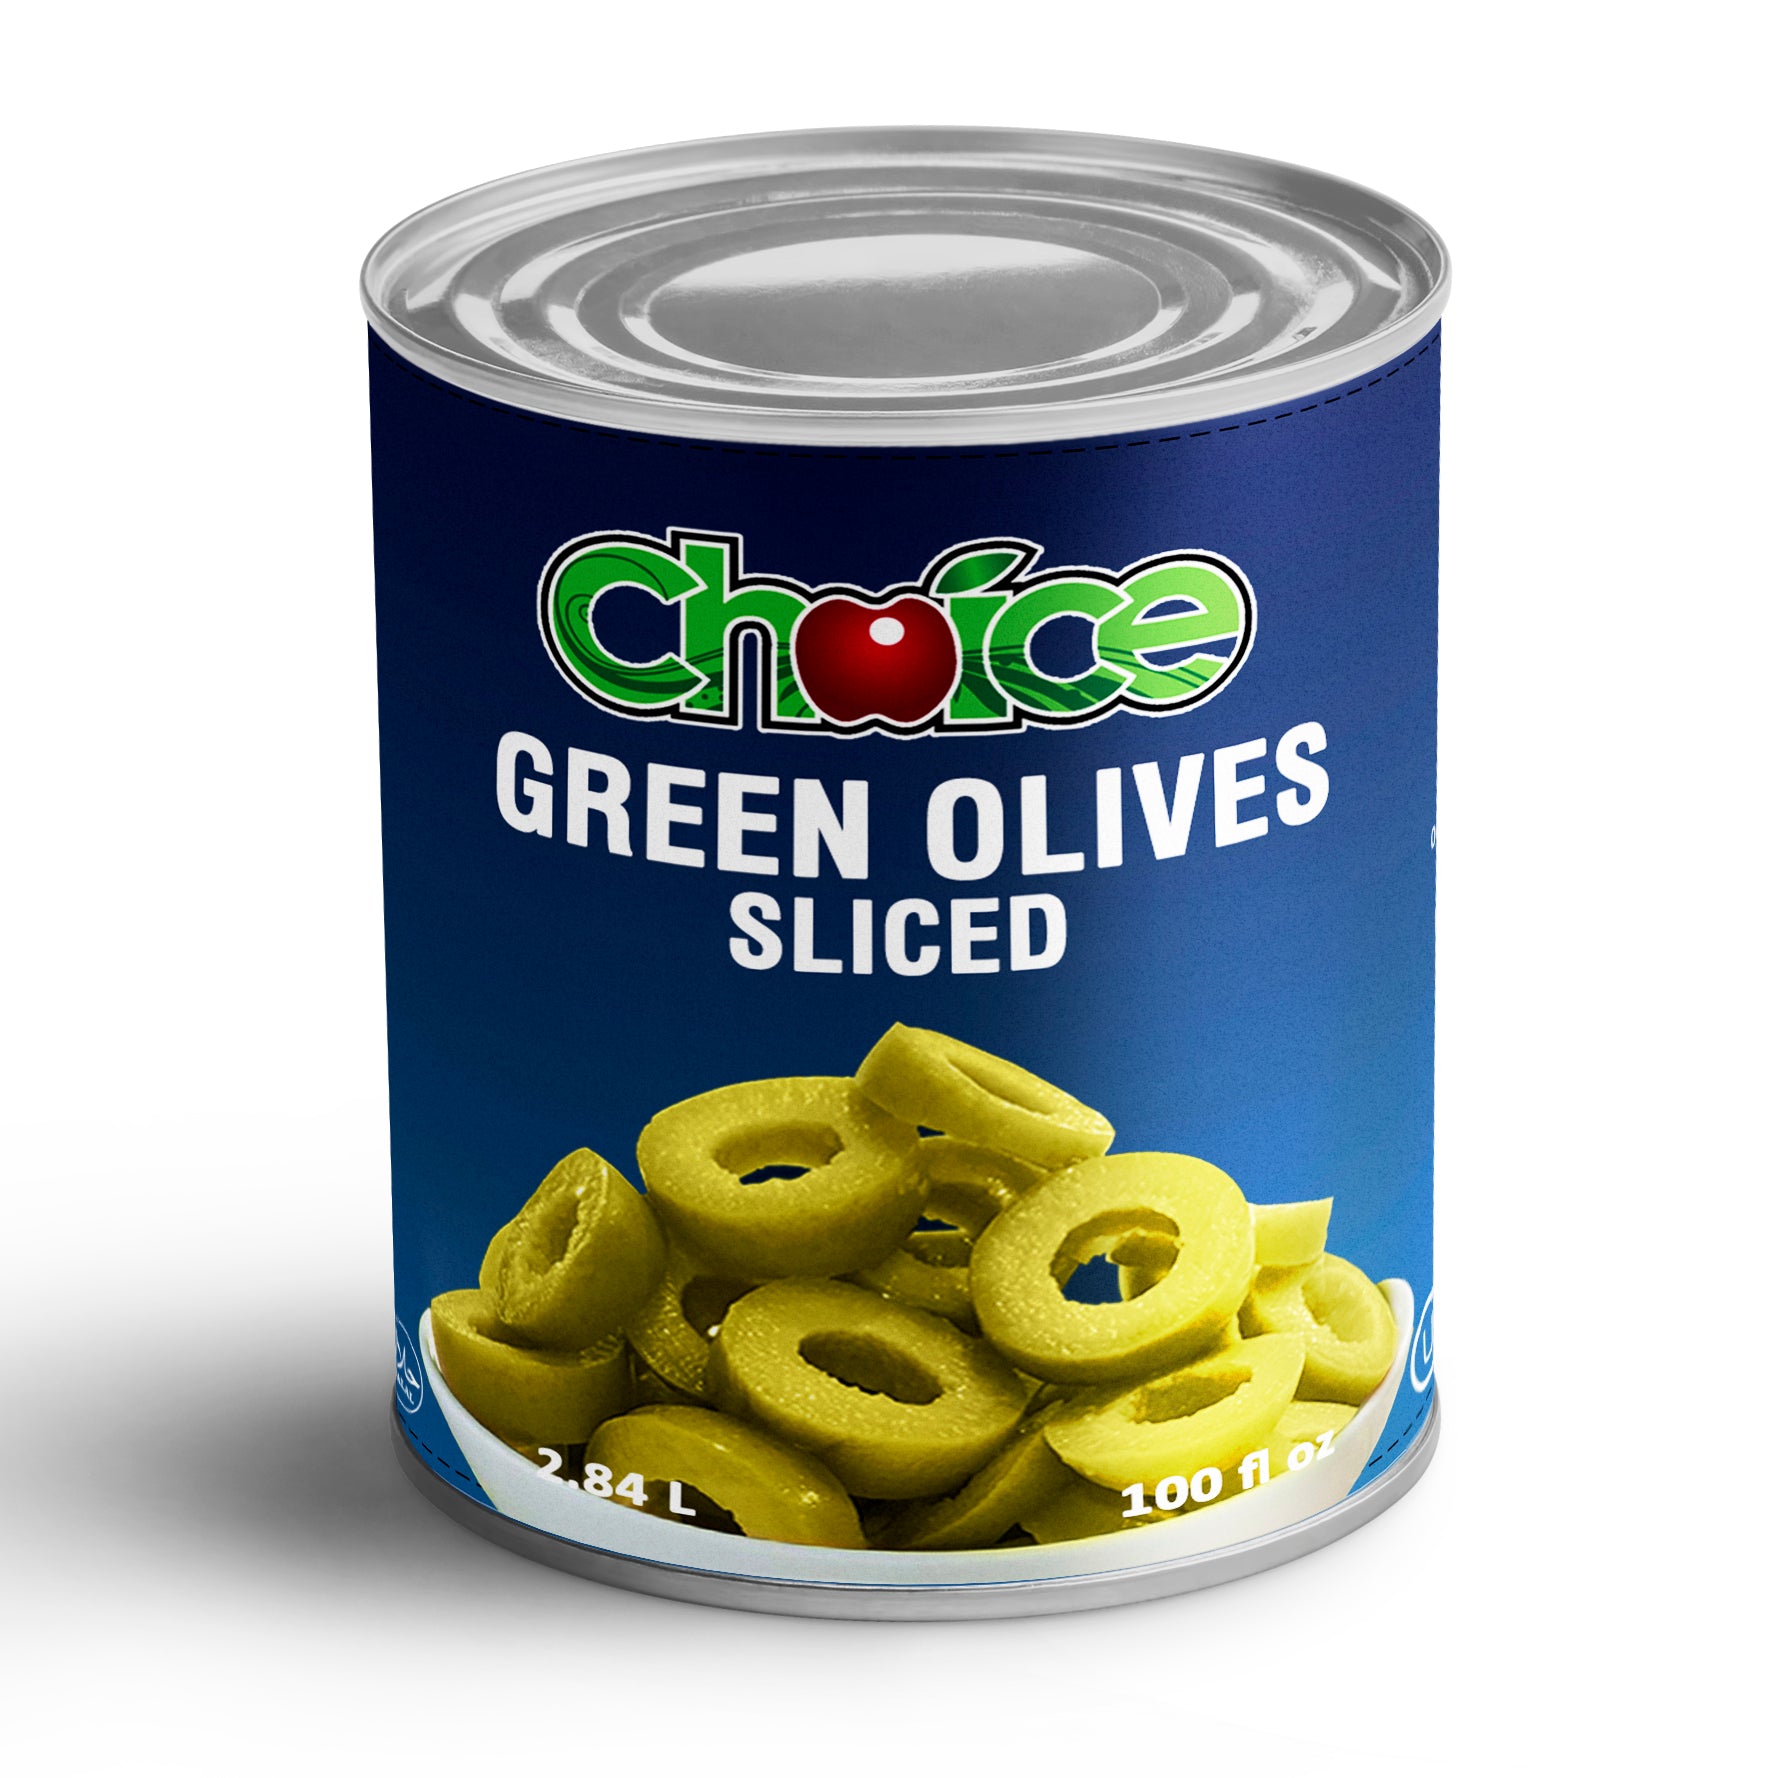 Chef's Choice - Green Olives - Sliced